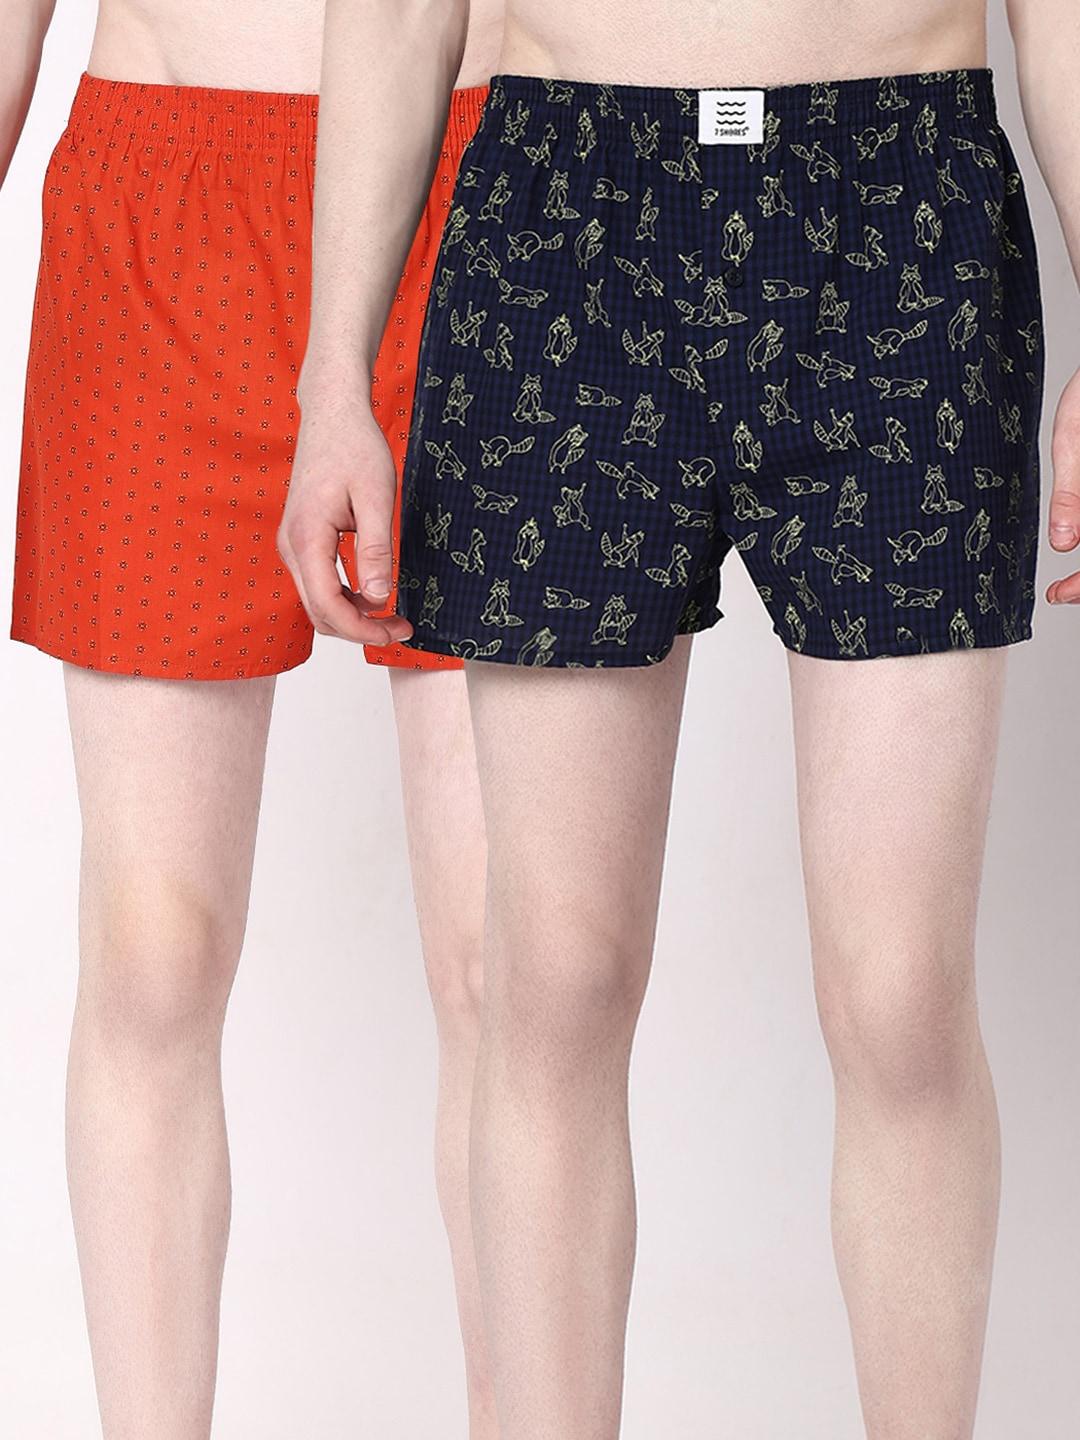 7Shores Pack Of 2 Printed Cotton Boxers BST-004